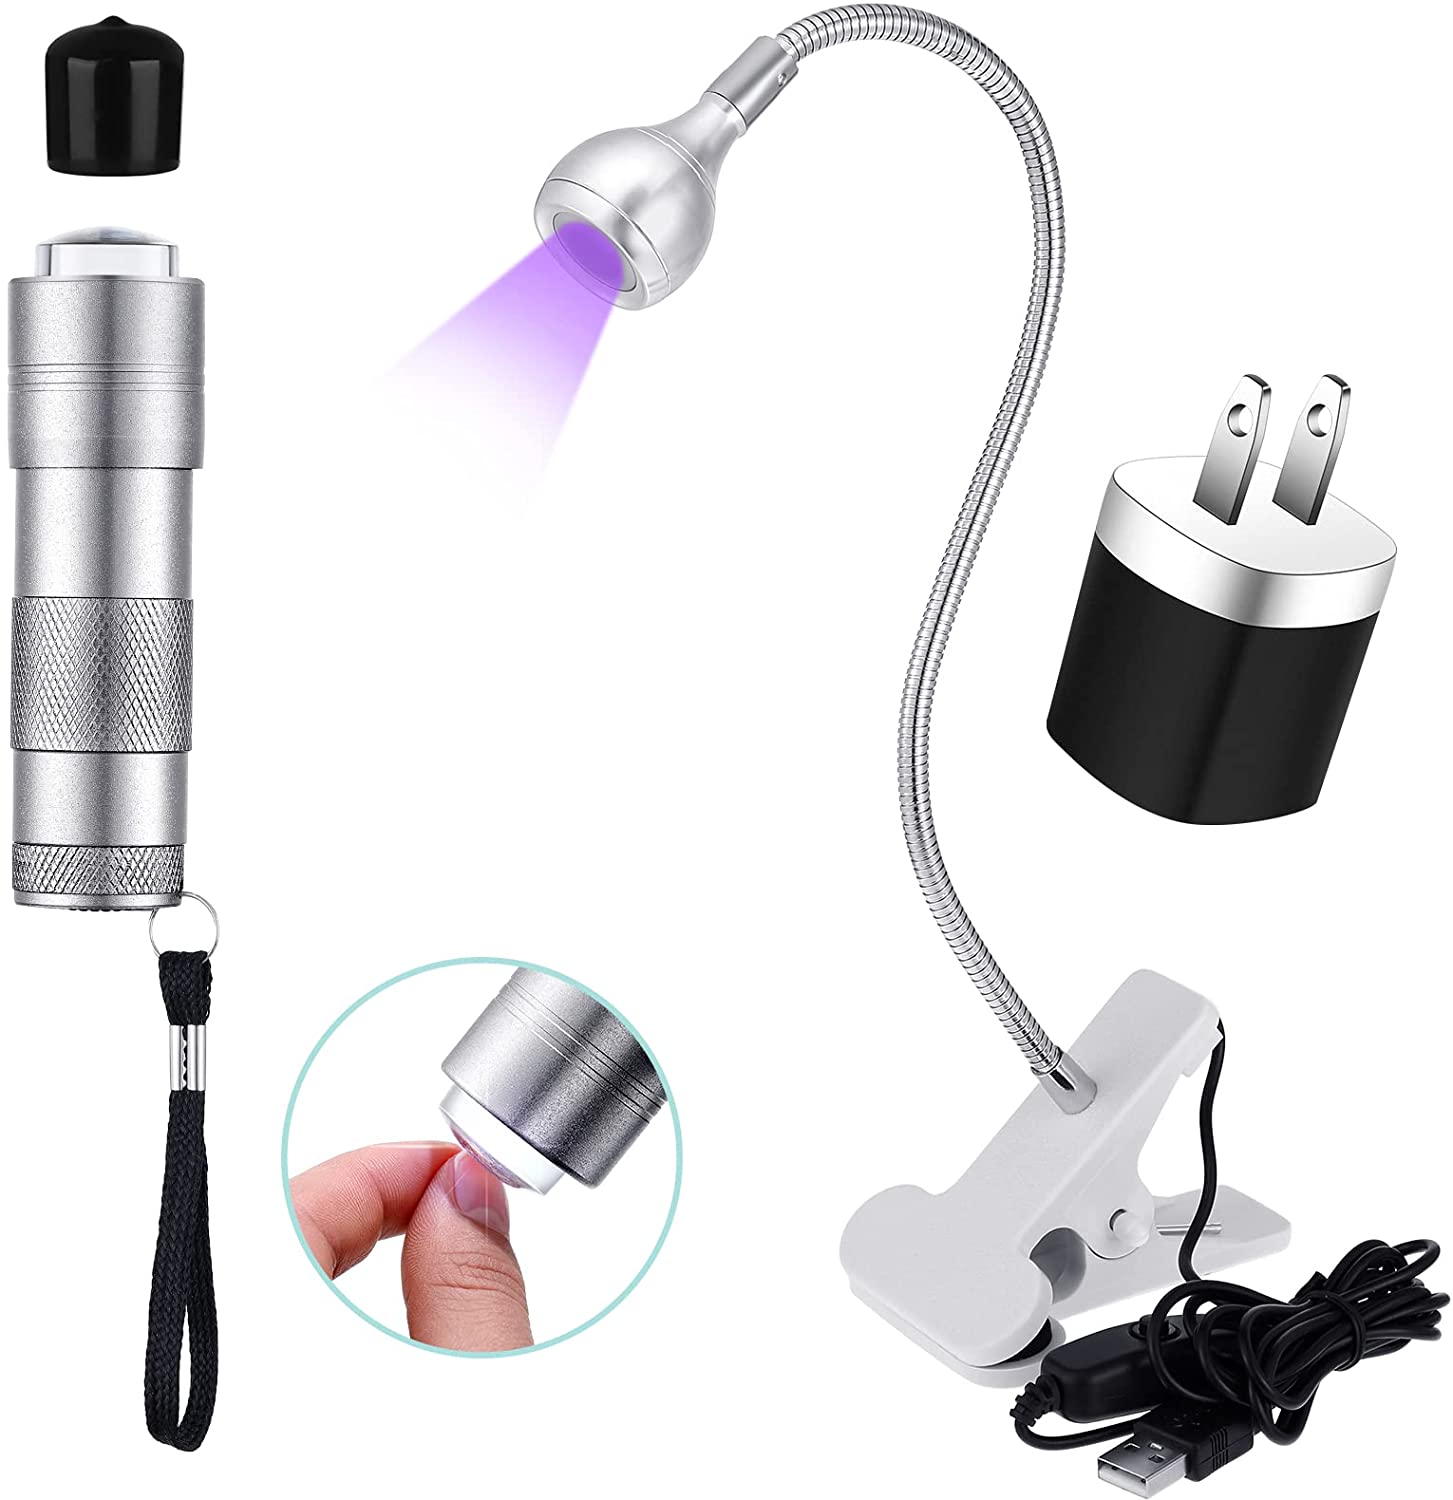 Big Chip 395 nm UV LED Light Fixtures with Gooseneck and Clamp for UV Gel Nail Curing with UV LED Nail Lamp for Gel Nails and Adapter USB Charger Block (Silver)